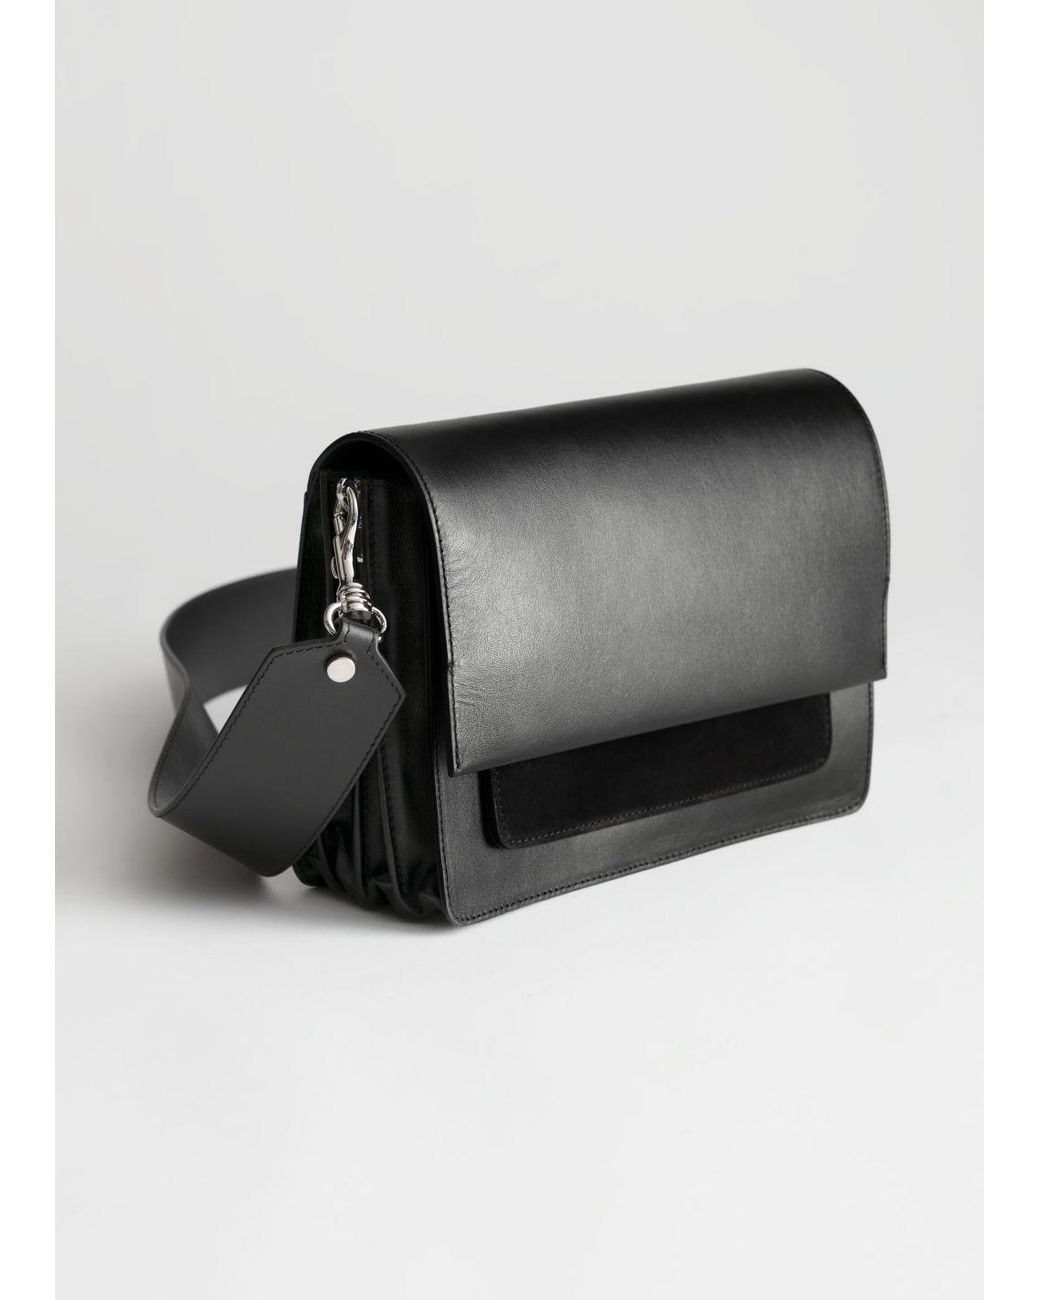 & Other Stories Short Leather Crossbody Bag in Black | Lyst UK